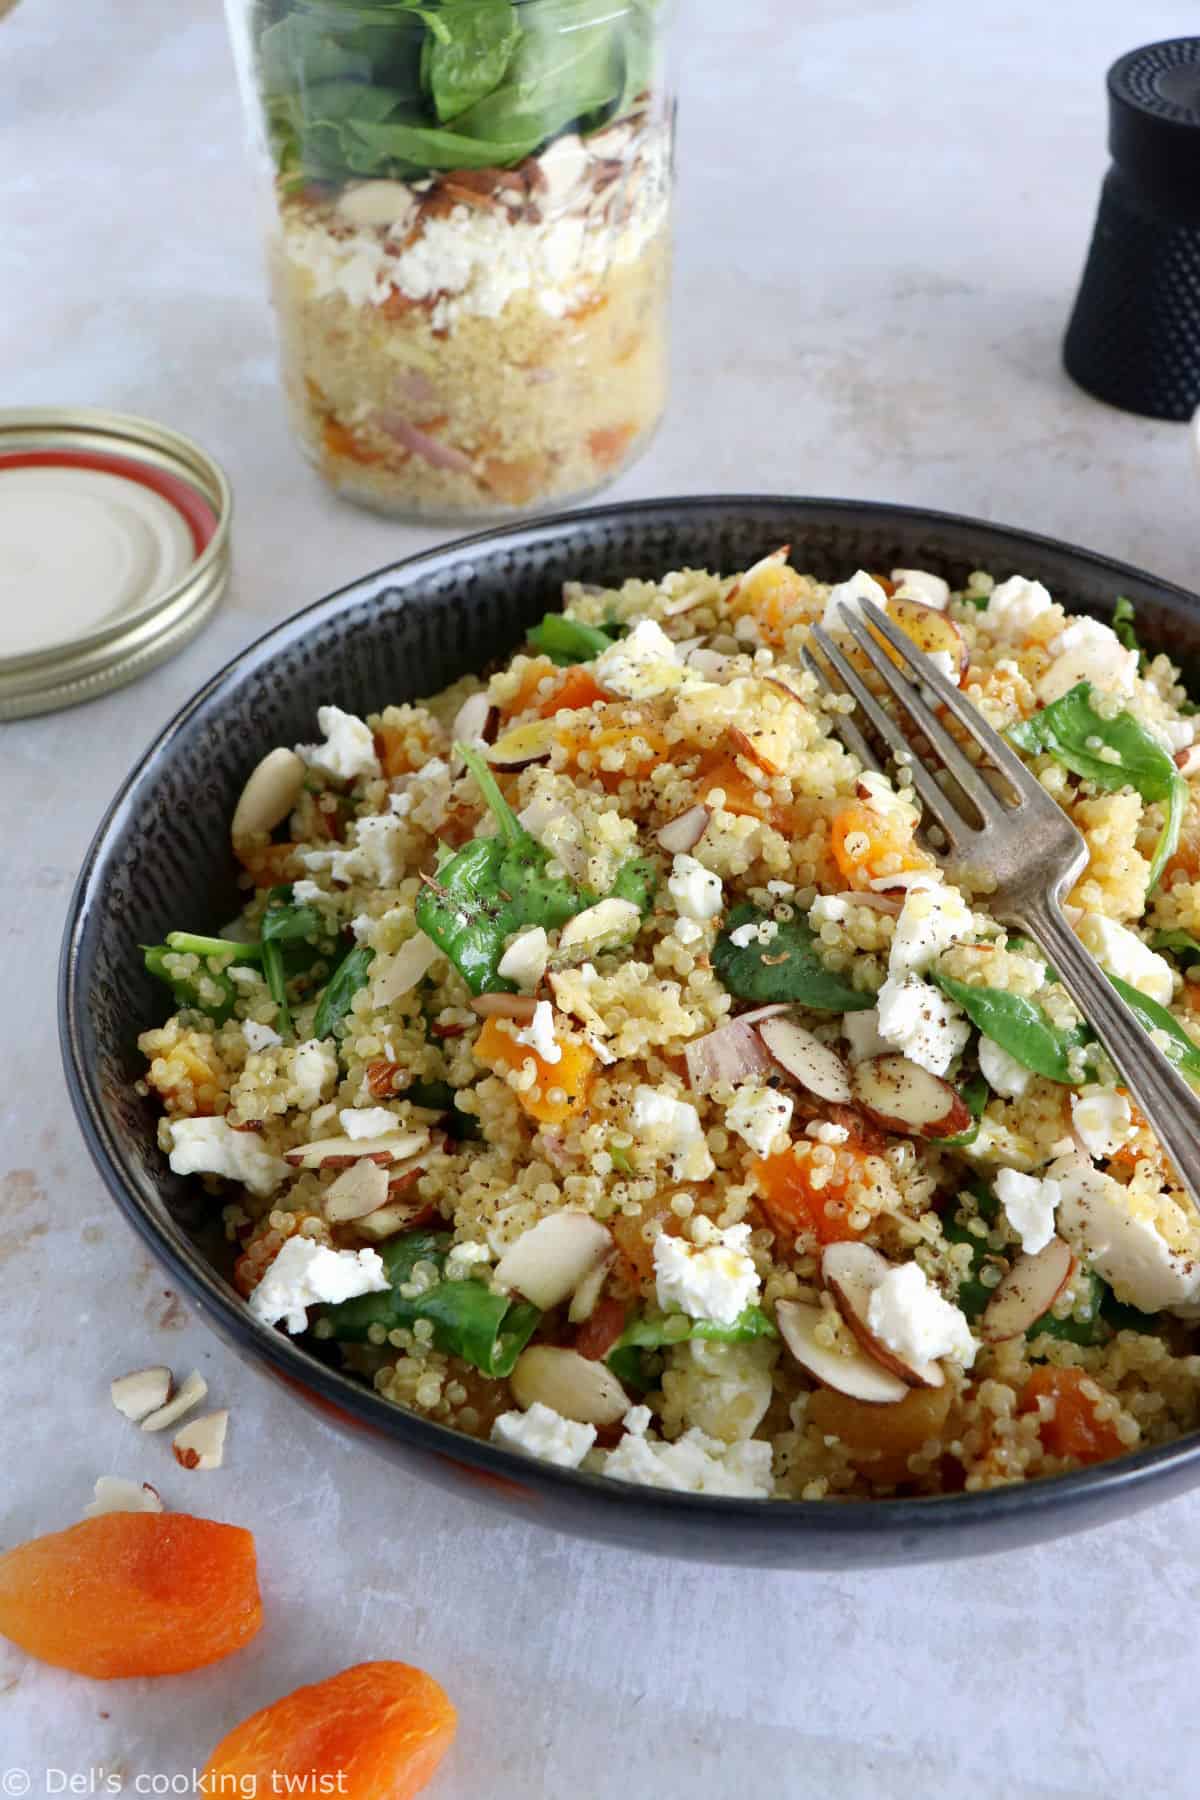 Up your salad game with this apricot and feta quinoa salad, tossed in a lemon curry dressing. Loaded with sweet and savory flavors, this vegetarian salad is also very nutritious and naturally gluten-free.